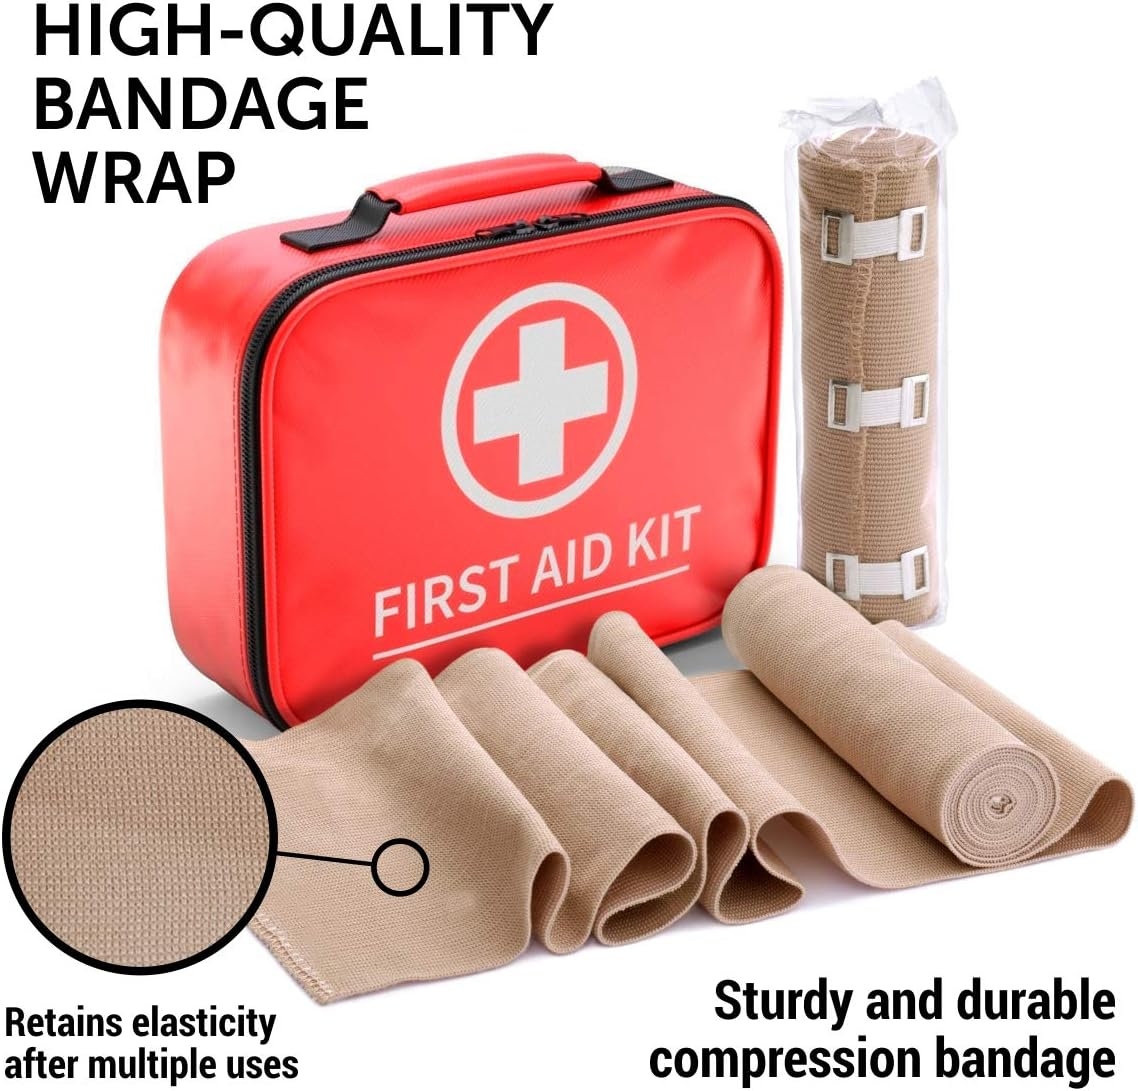 Premium Elastic Bandage Wrap - 2 Pack + 18 Extra Clips - Wide (6 inch) Compression Bandage - Stretches up to 15ft in Length